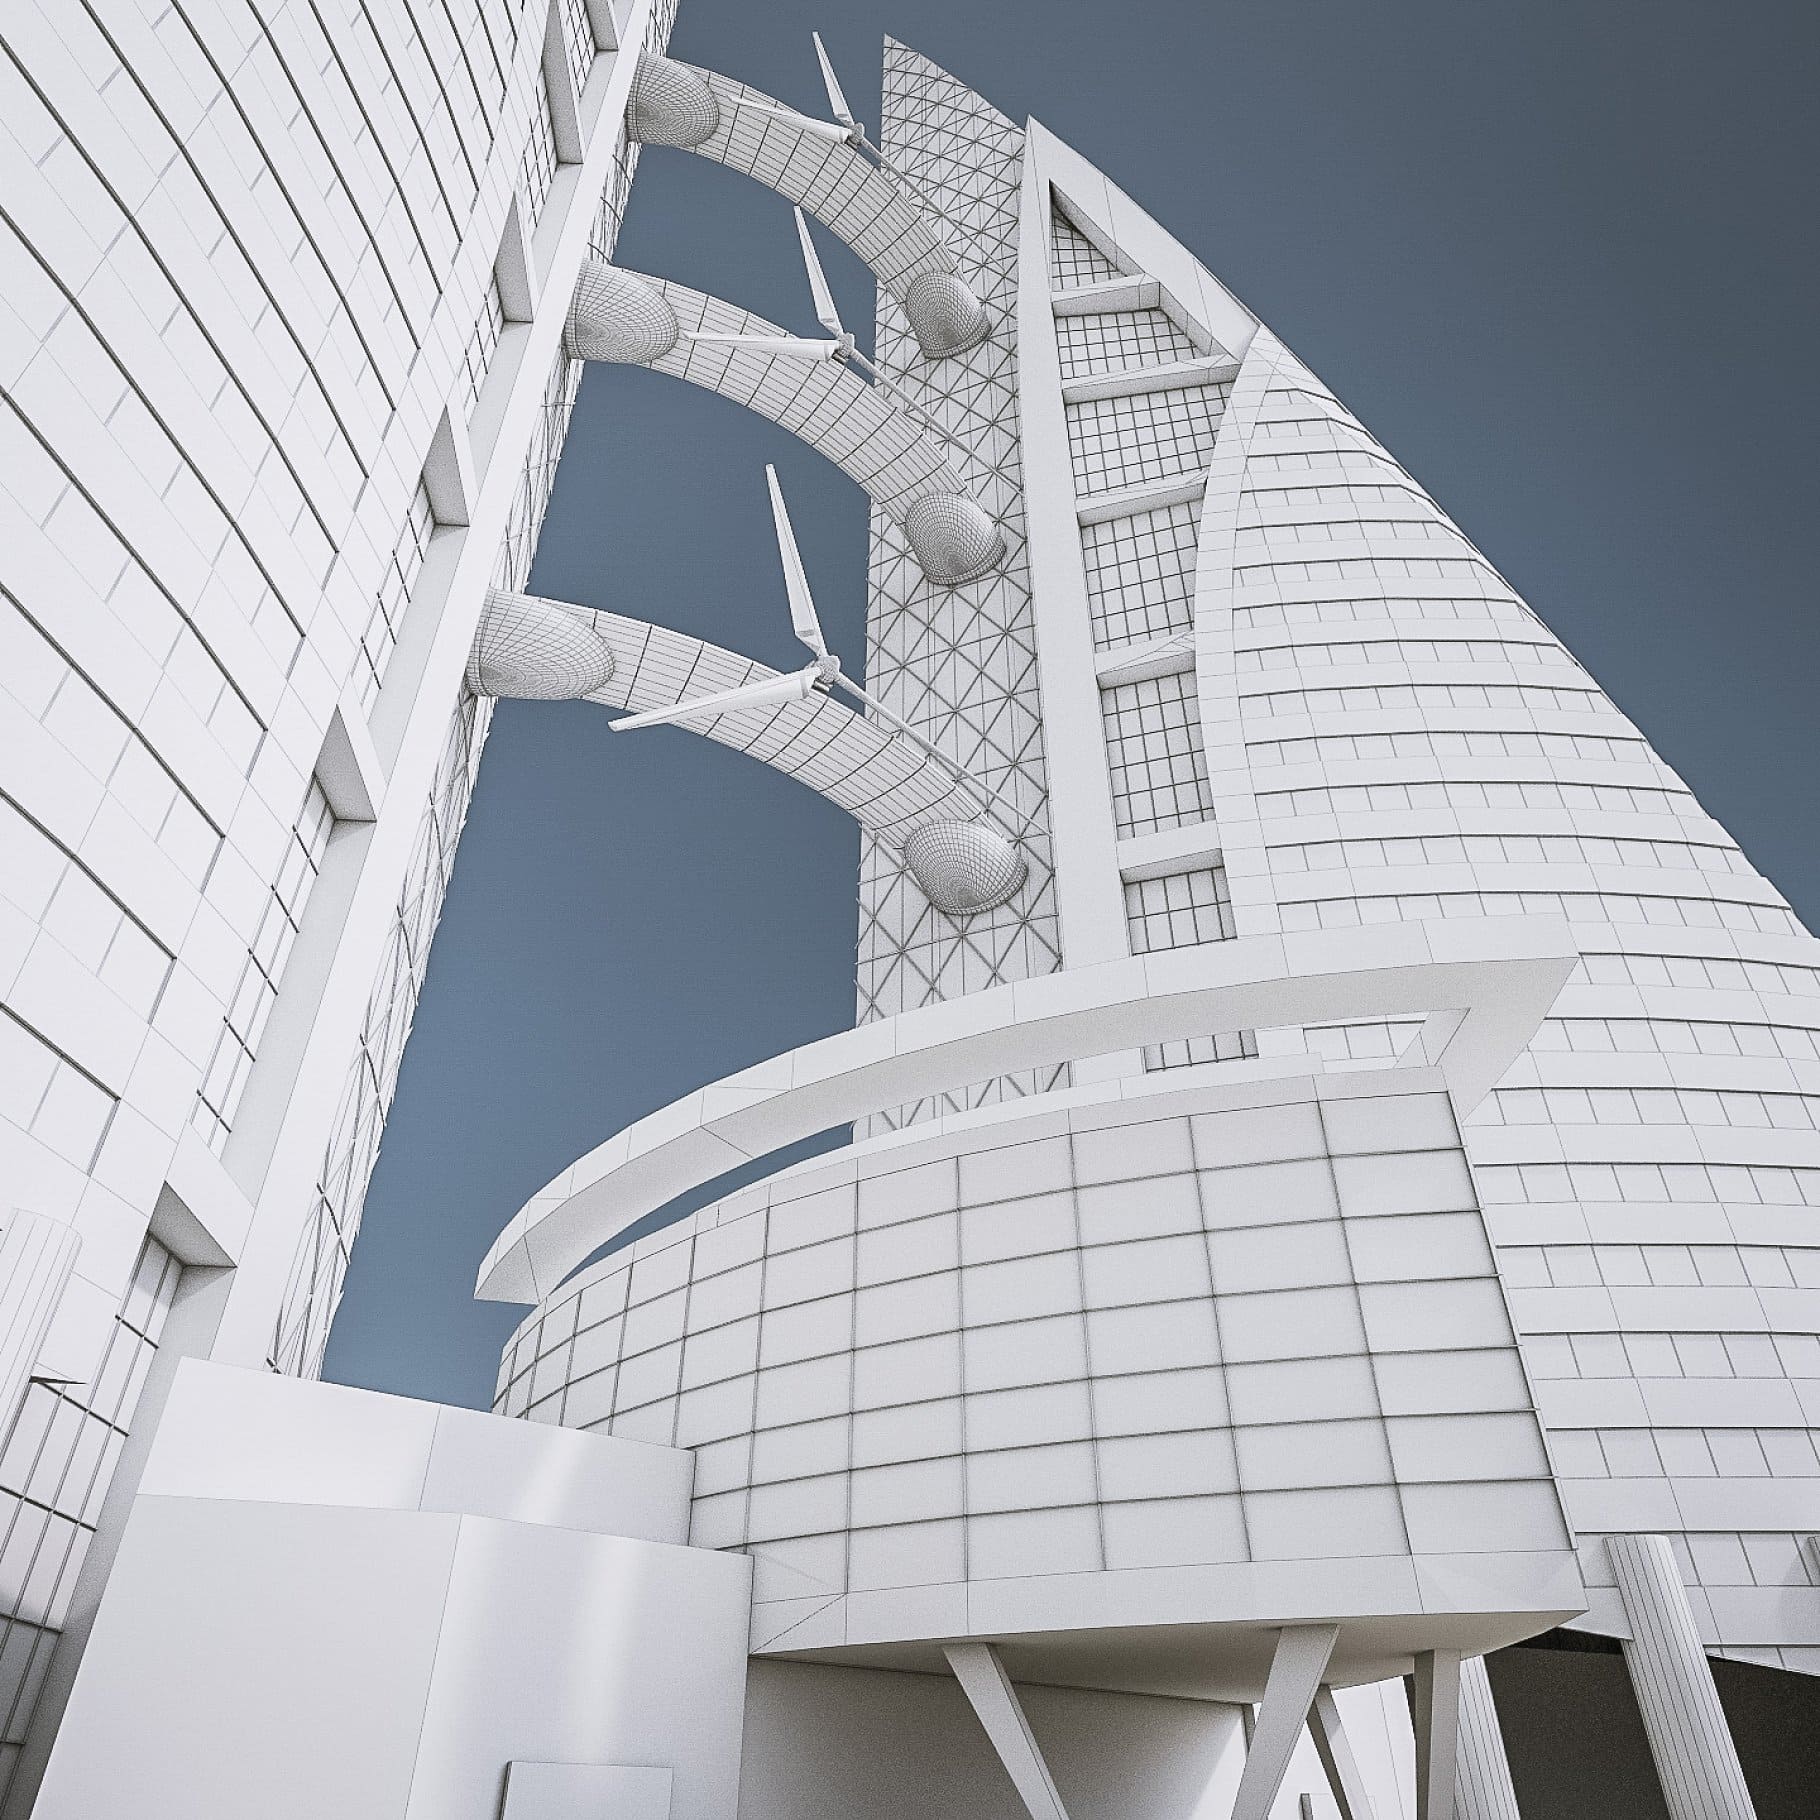 A close-up of the 3D model of the Bahrain World Trade Center.